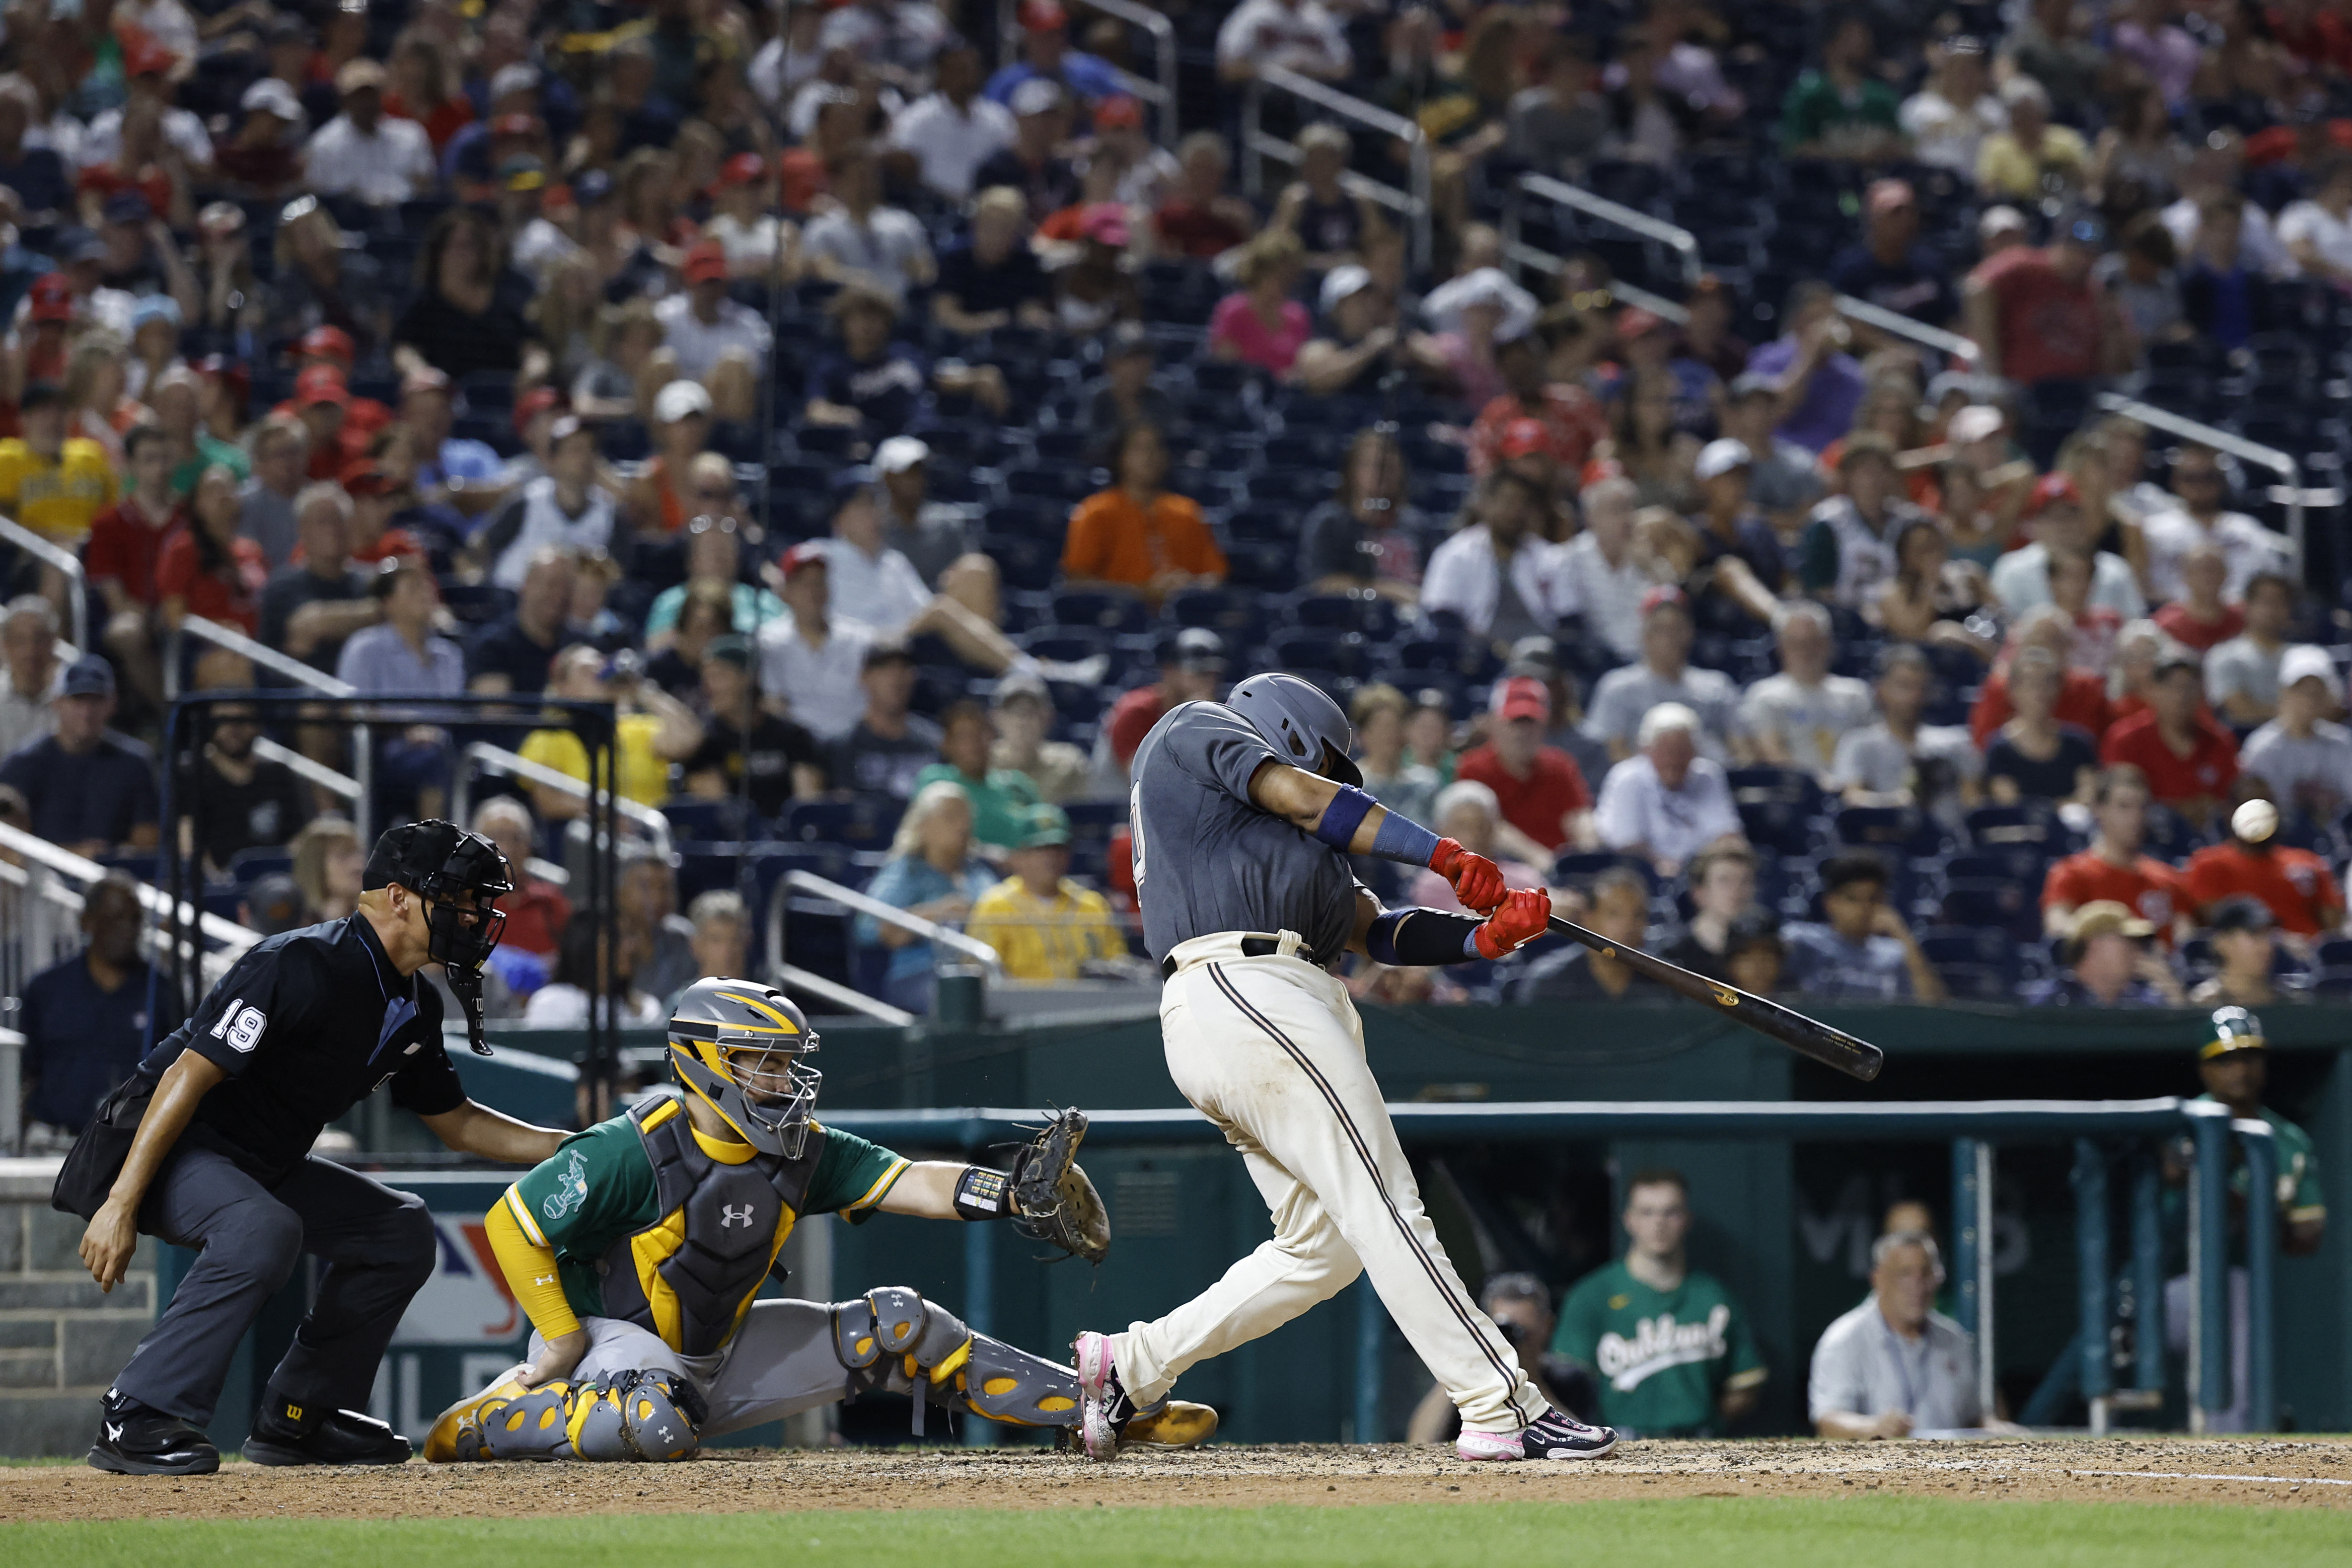 A's fall again as Nationals win on Ruiz's walkoff home run